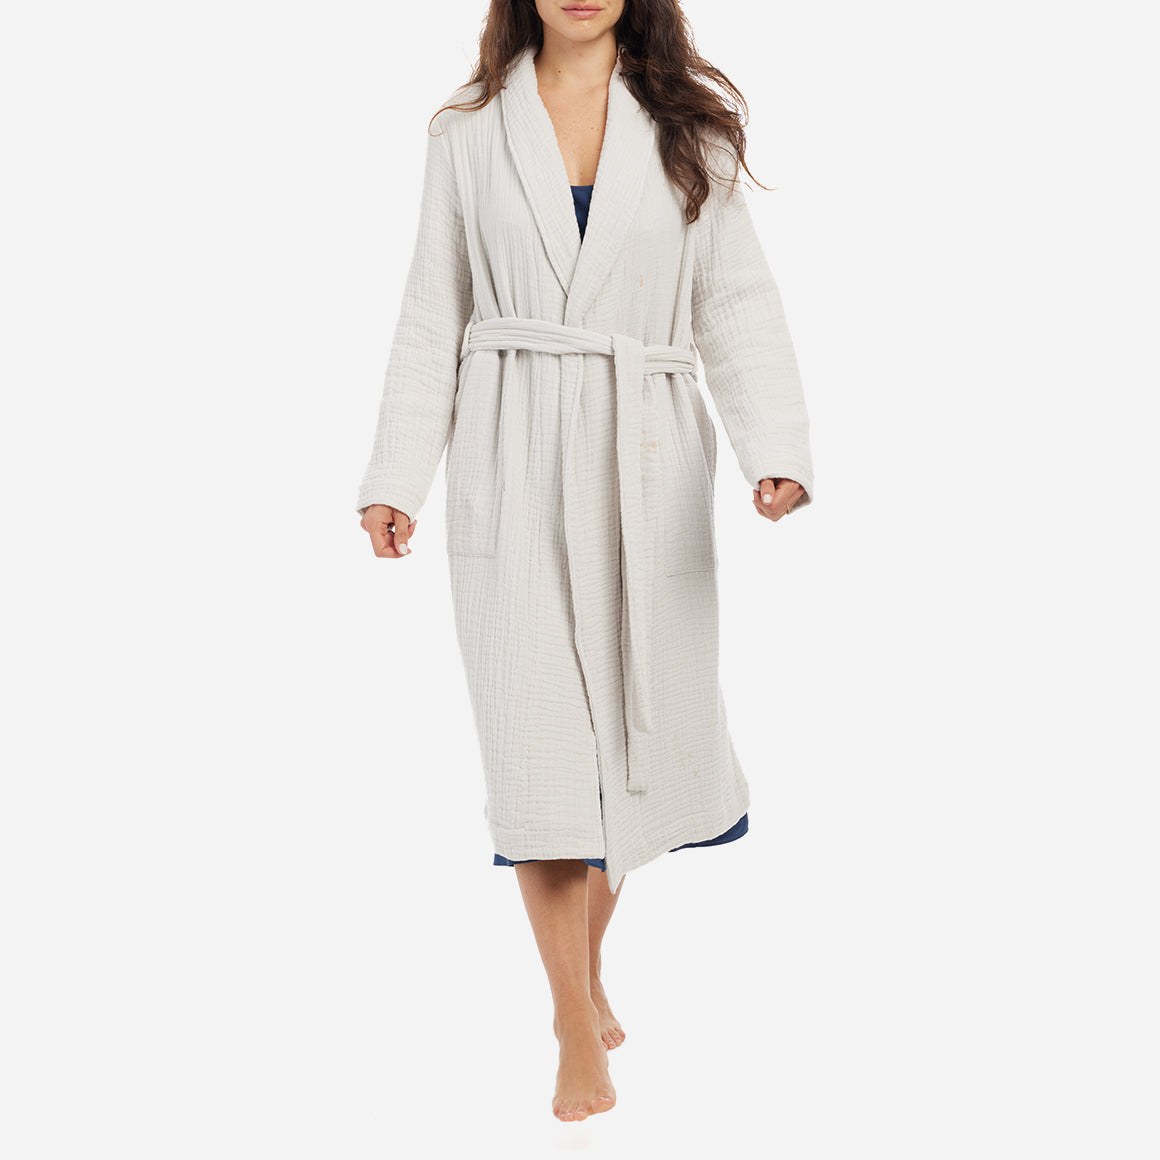 The Zoey Robe features a relaxed fit with a detachable belt and pockets for added convenience. The breathable cotton gauze fibers are designed to keep you cool and cozy as you unwind or go about your bedtime routine.